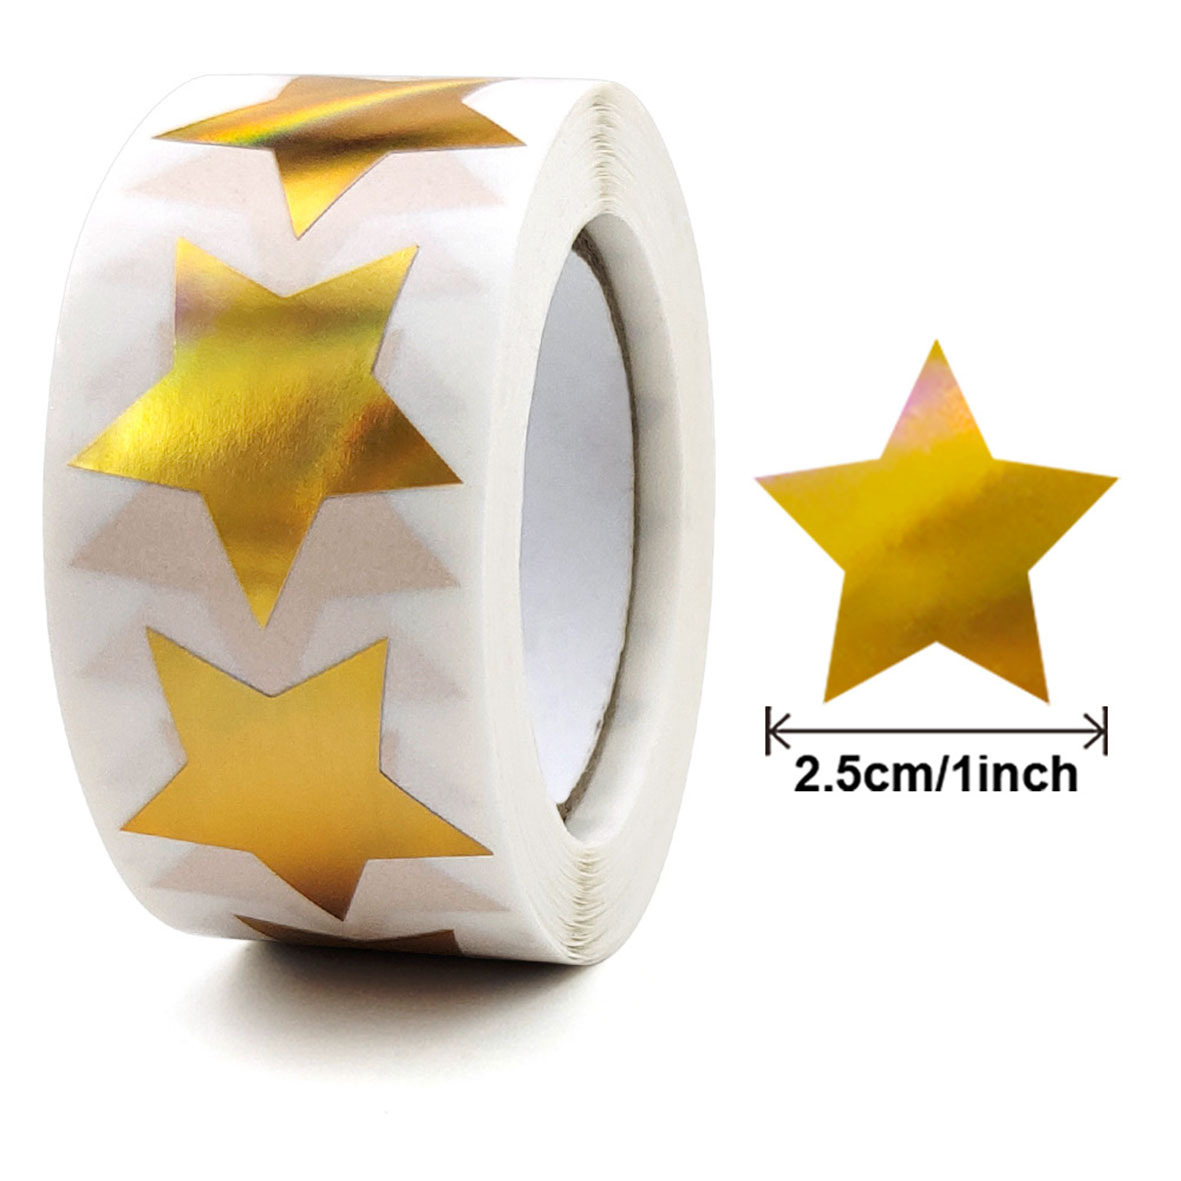 Gold Foil Star Stickers, Gold Star Stickers